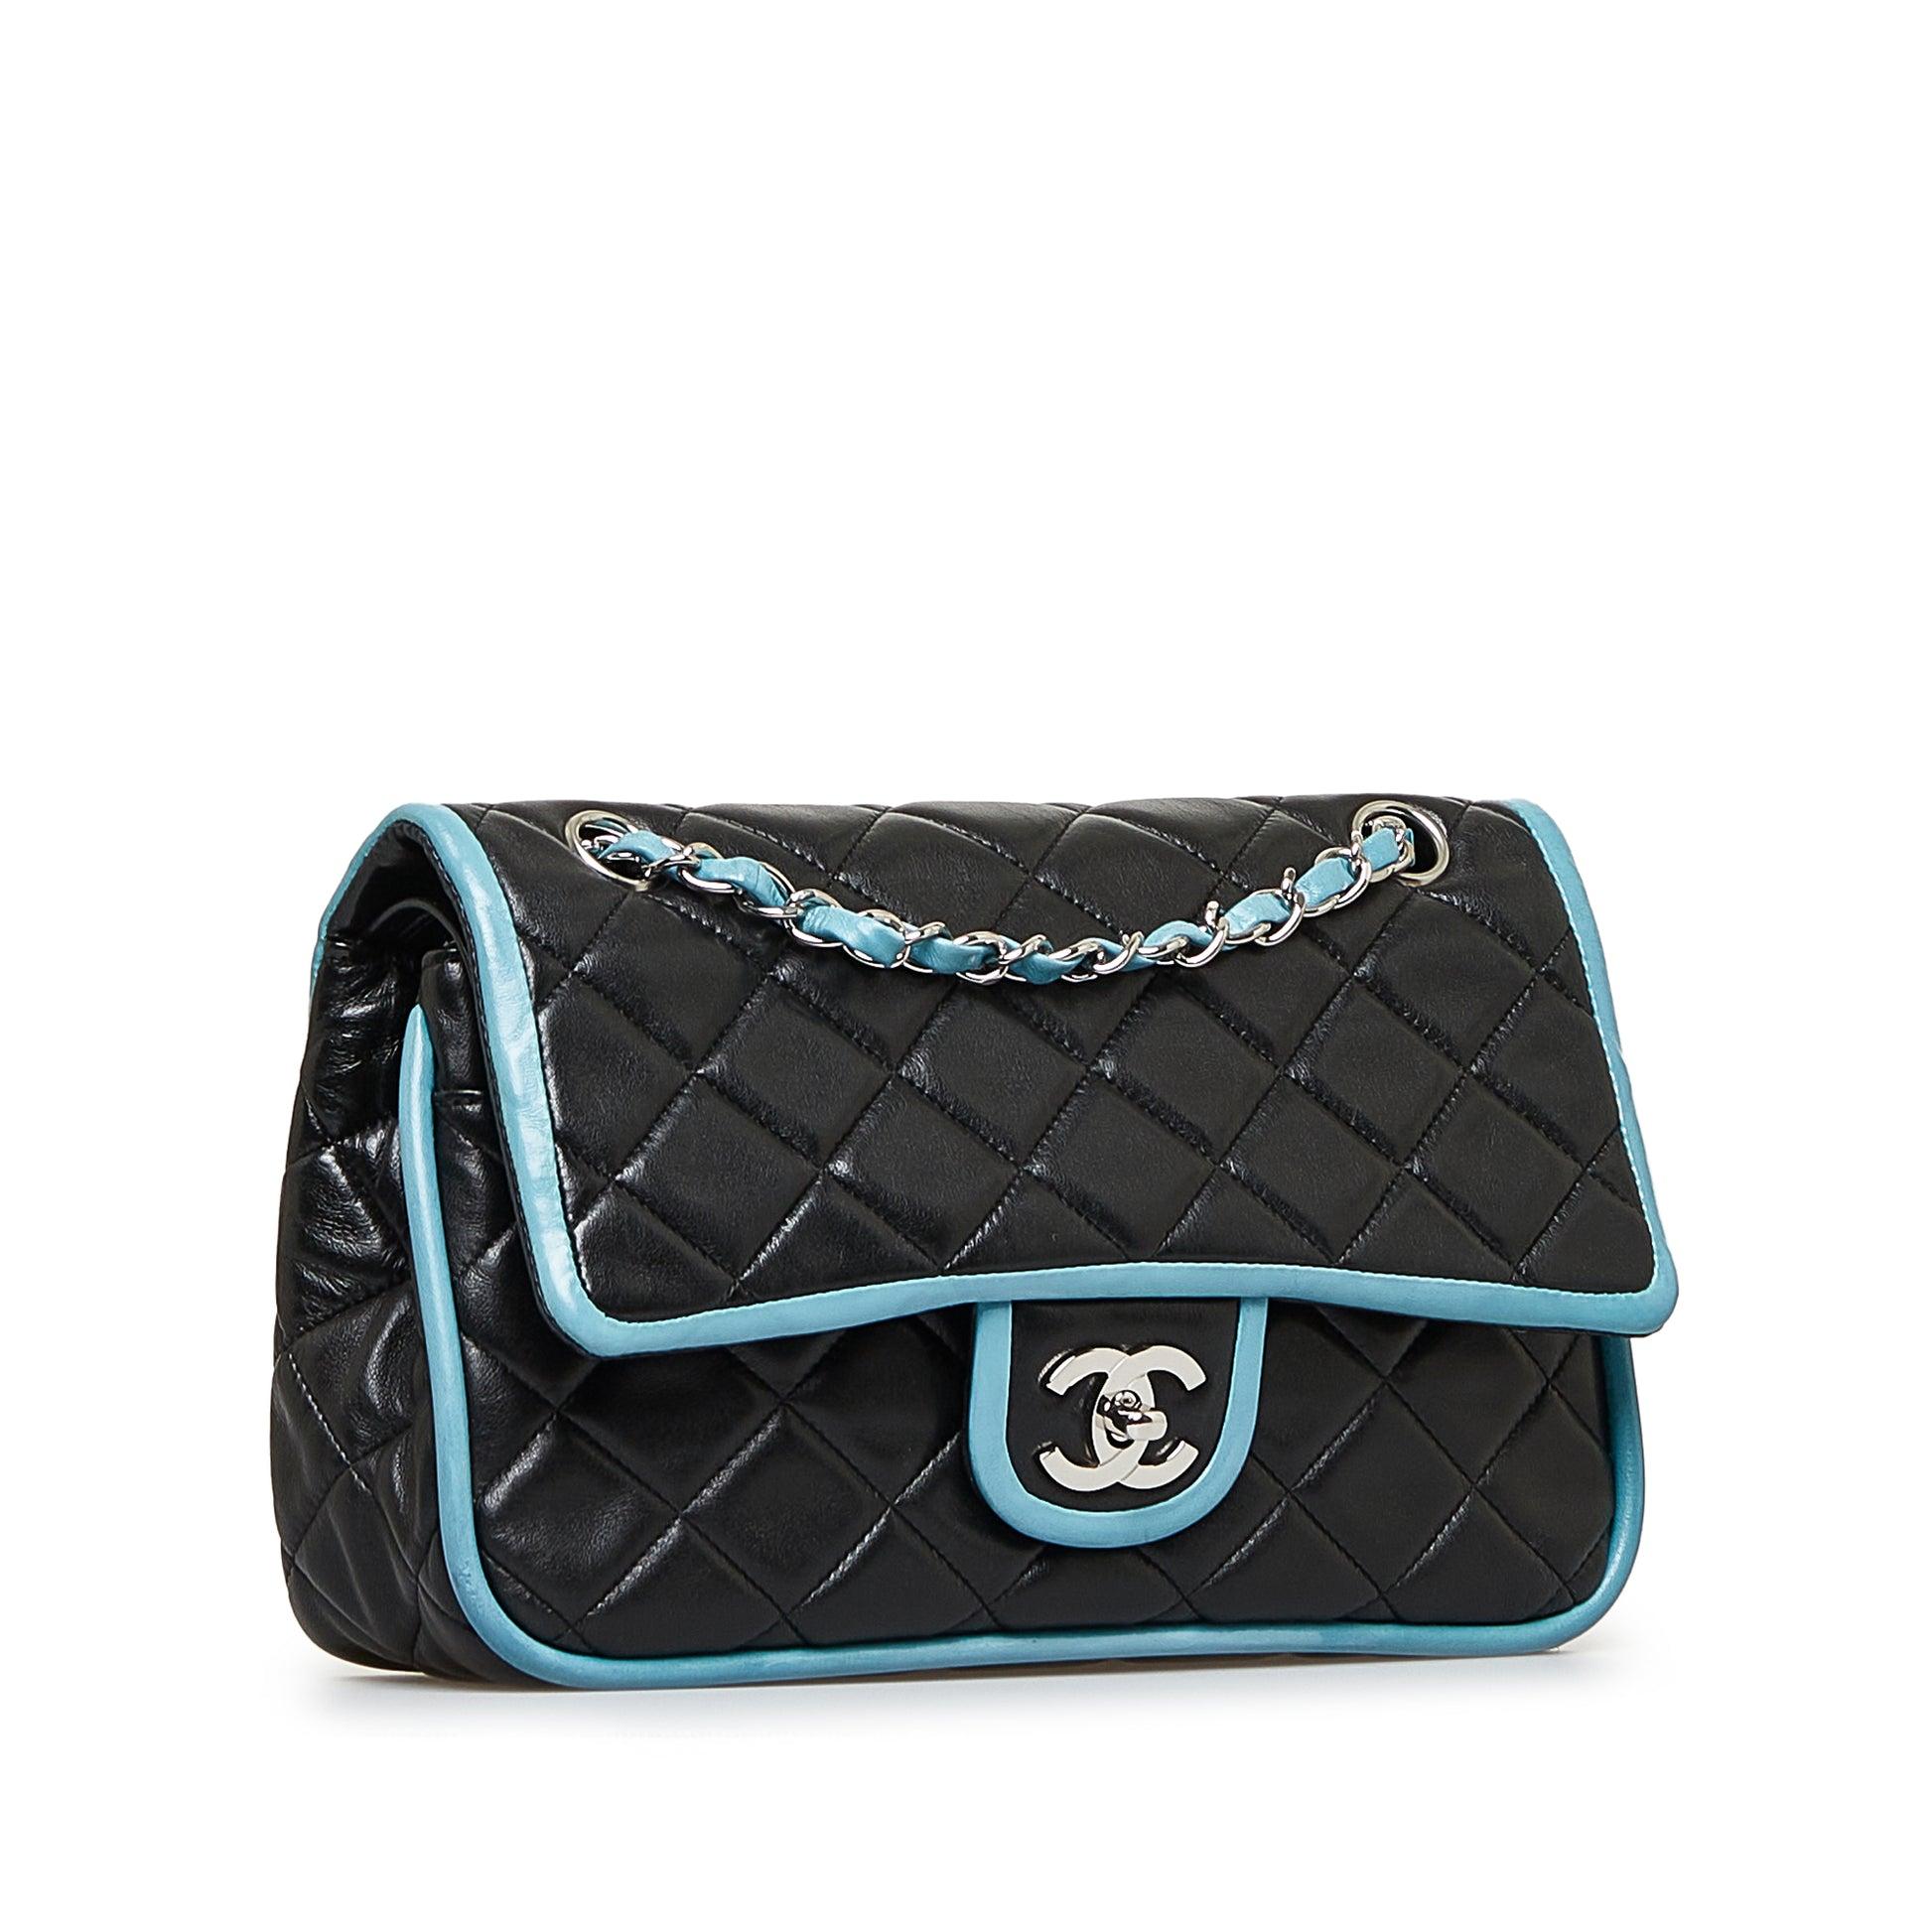 Chanel 2006 Medium Double Classic Flap in Black Lambskin Turquoise Piping Bag For Sale 4